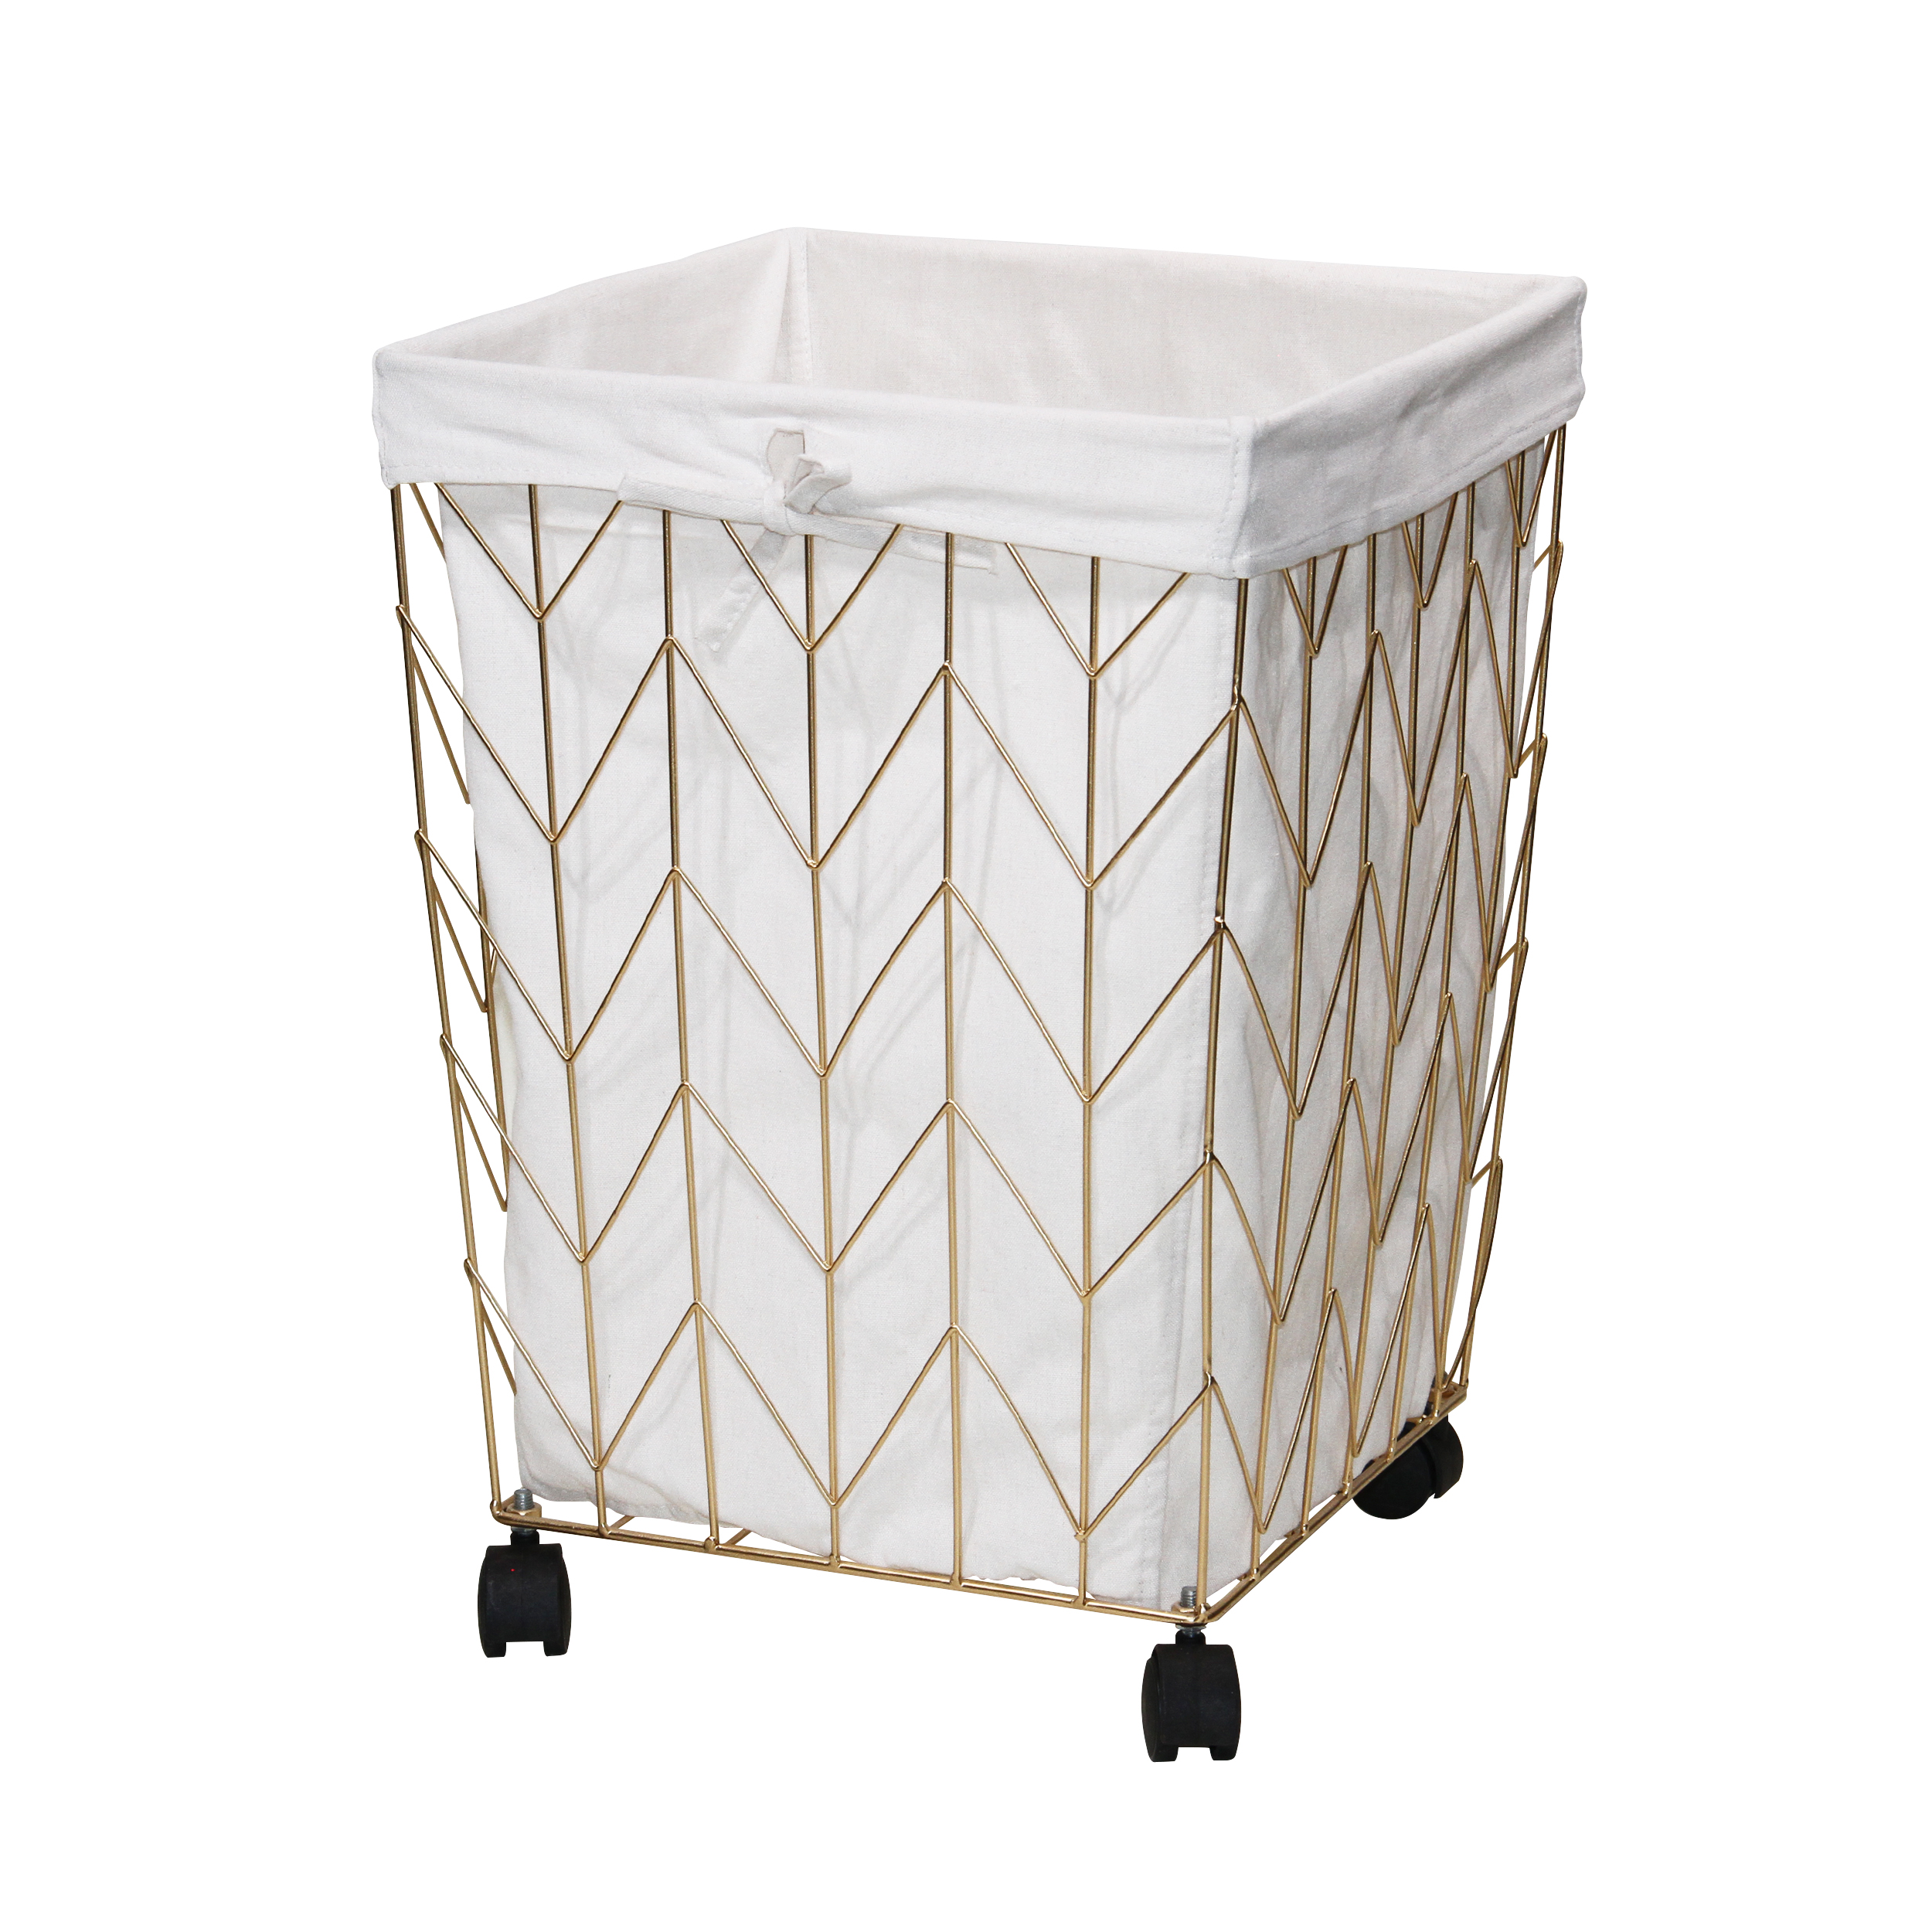 Mainstays Square Chevron Pattern Metal Laundry Hamper with Wheels, Gold & Natural - image 1 of 3